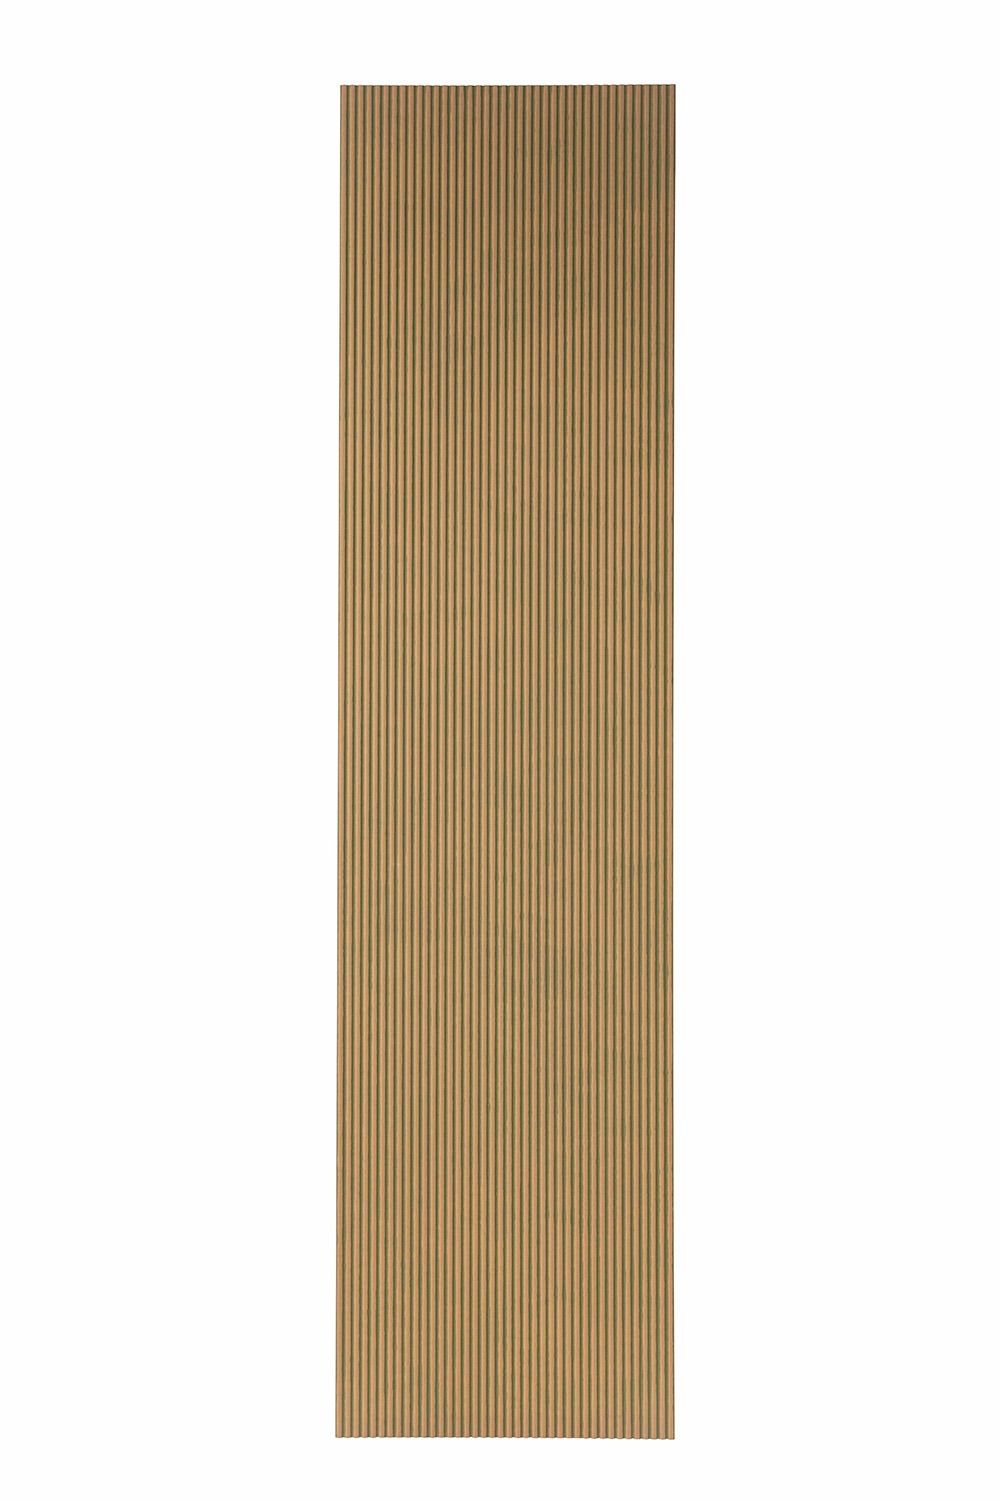 full product image of a reeded mdf wall panel 